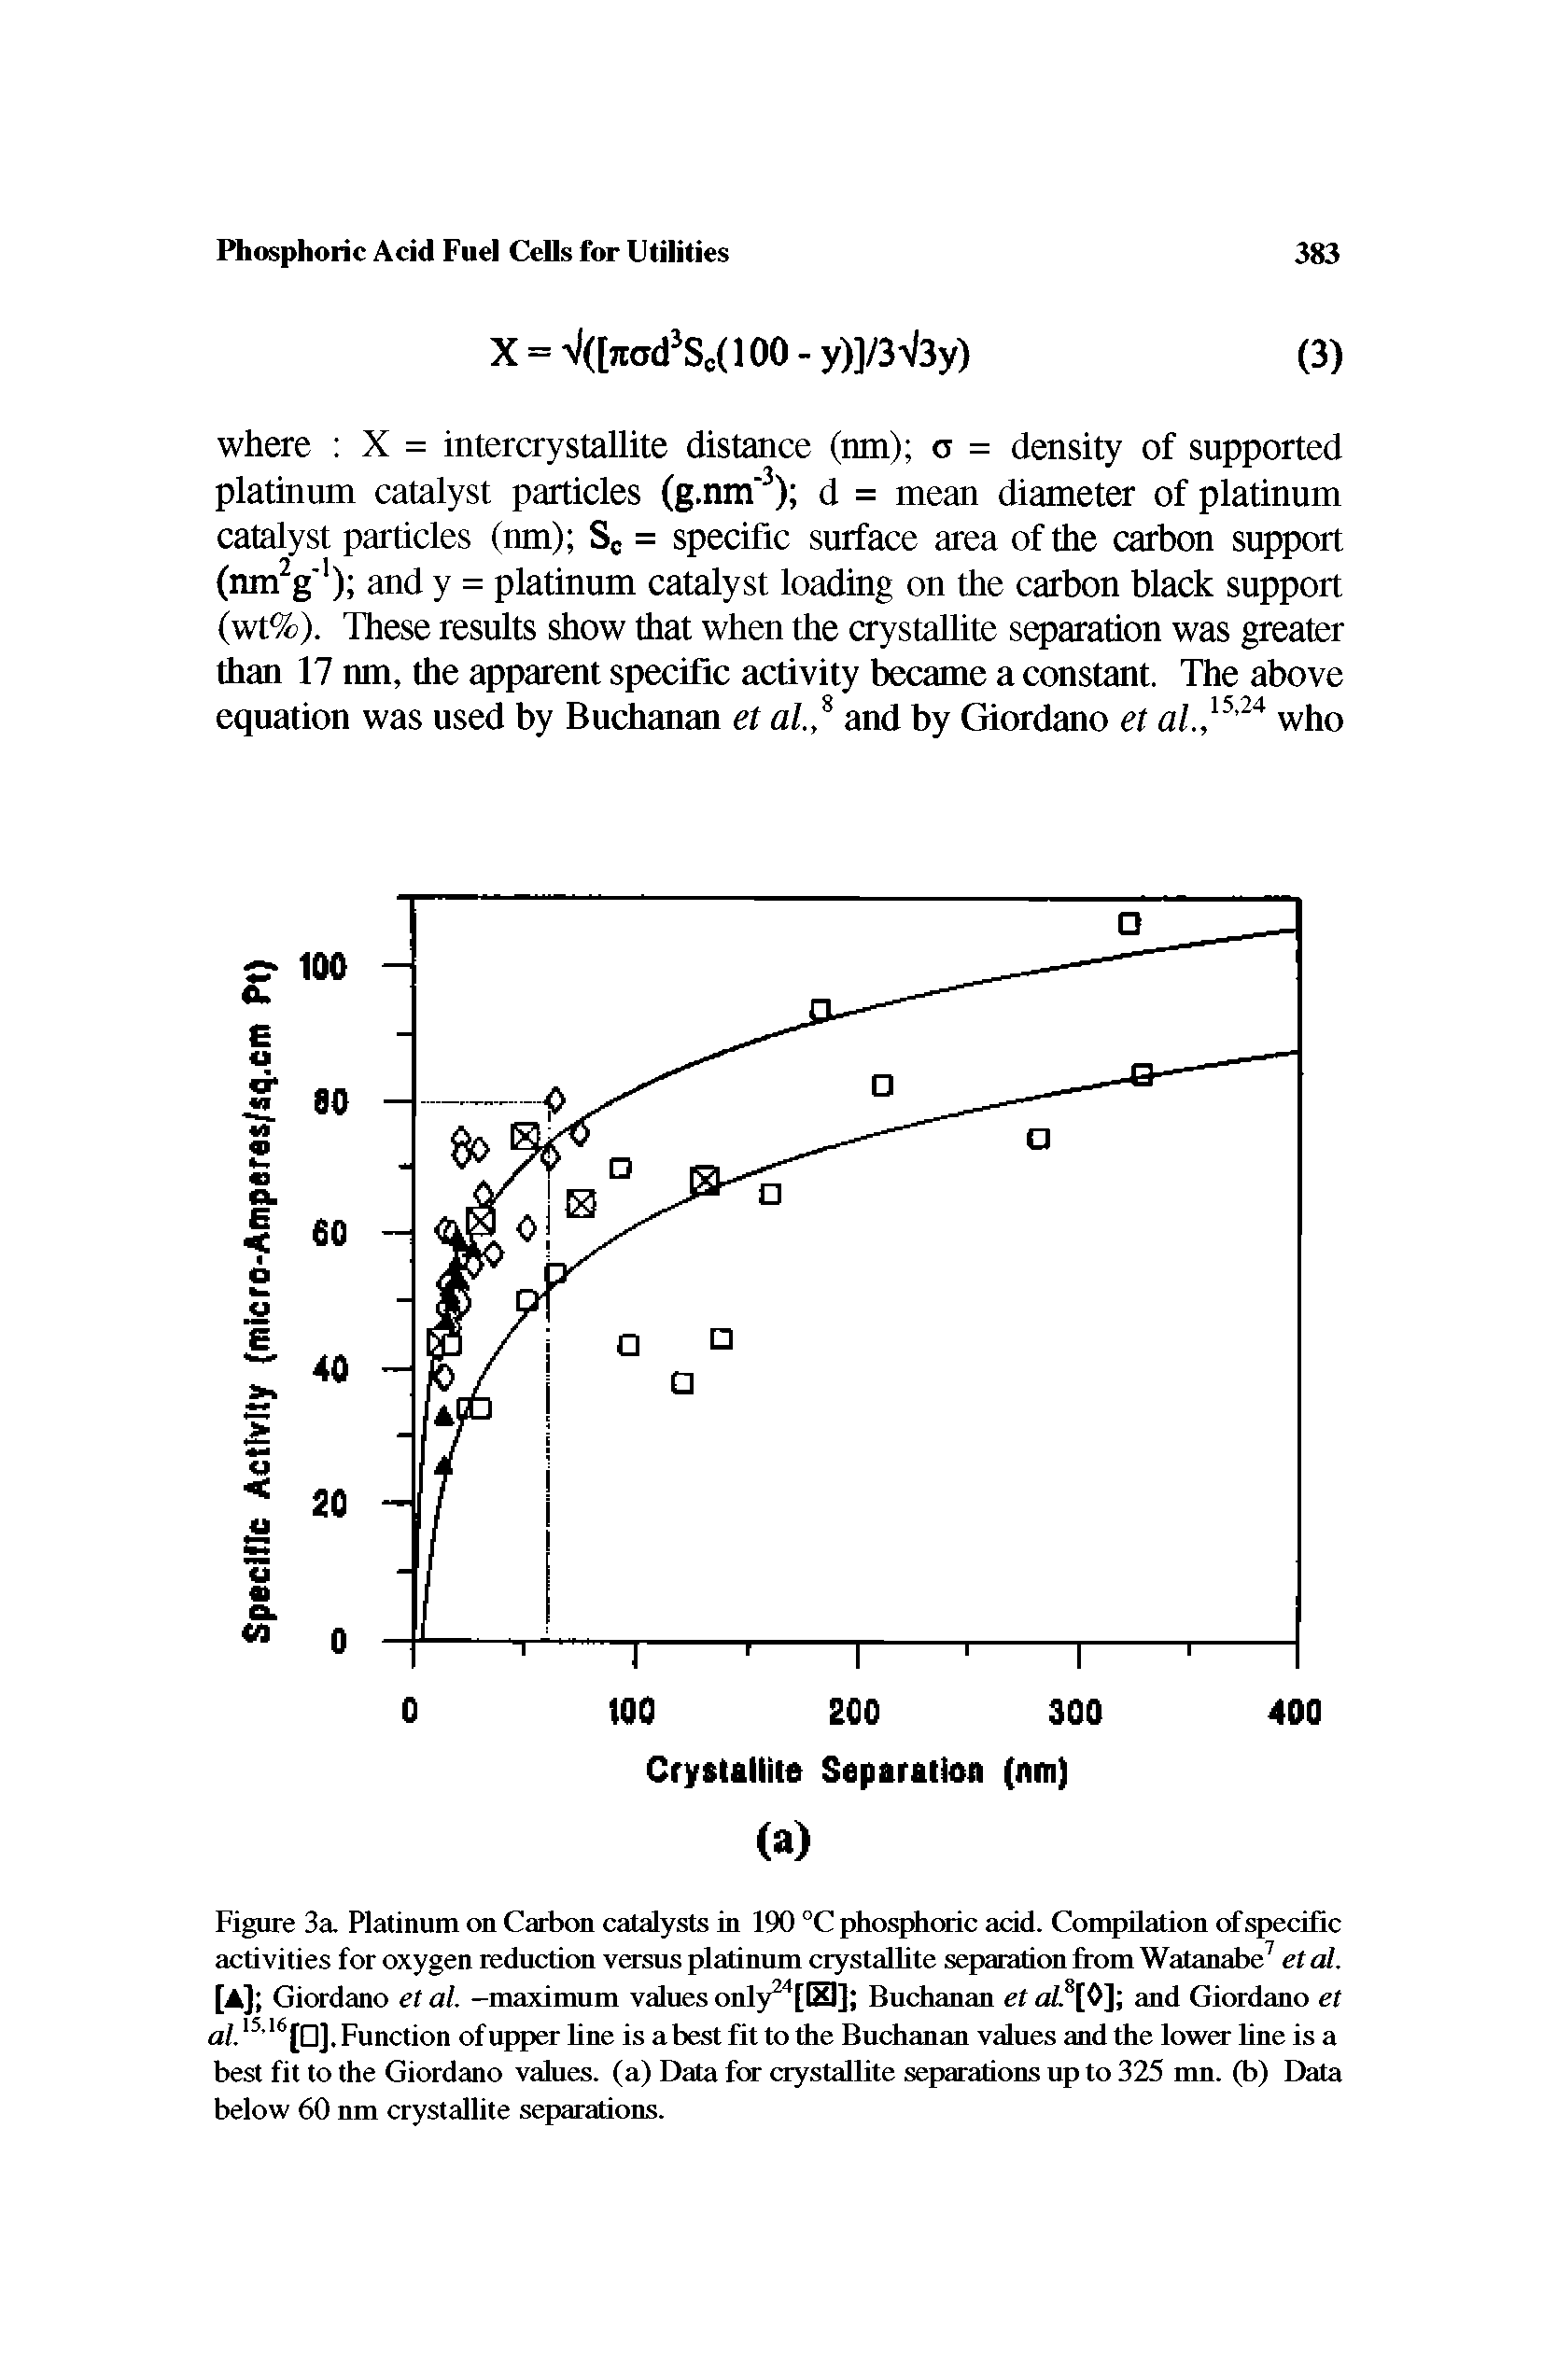 Figure 3a. Platinum on Carbon catalysts in 190 °C phosphoric add. Compilation of specific activities for oxygen reduction versus platinum crystallite separation from Watanabe7 et al. M Giordano et al. —maximum values only24 ] Buchanan et aL 8[0] and Giordano et al. 15 16[D]. Function of upper tine is abestfittothe Buchanan values and the lower tine is a best fit to the Giordano values, (a) Data for crystallite separations up to 325 mn. (b) Data below 60 nm crystallite separations.